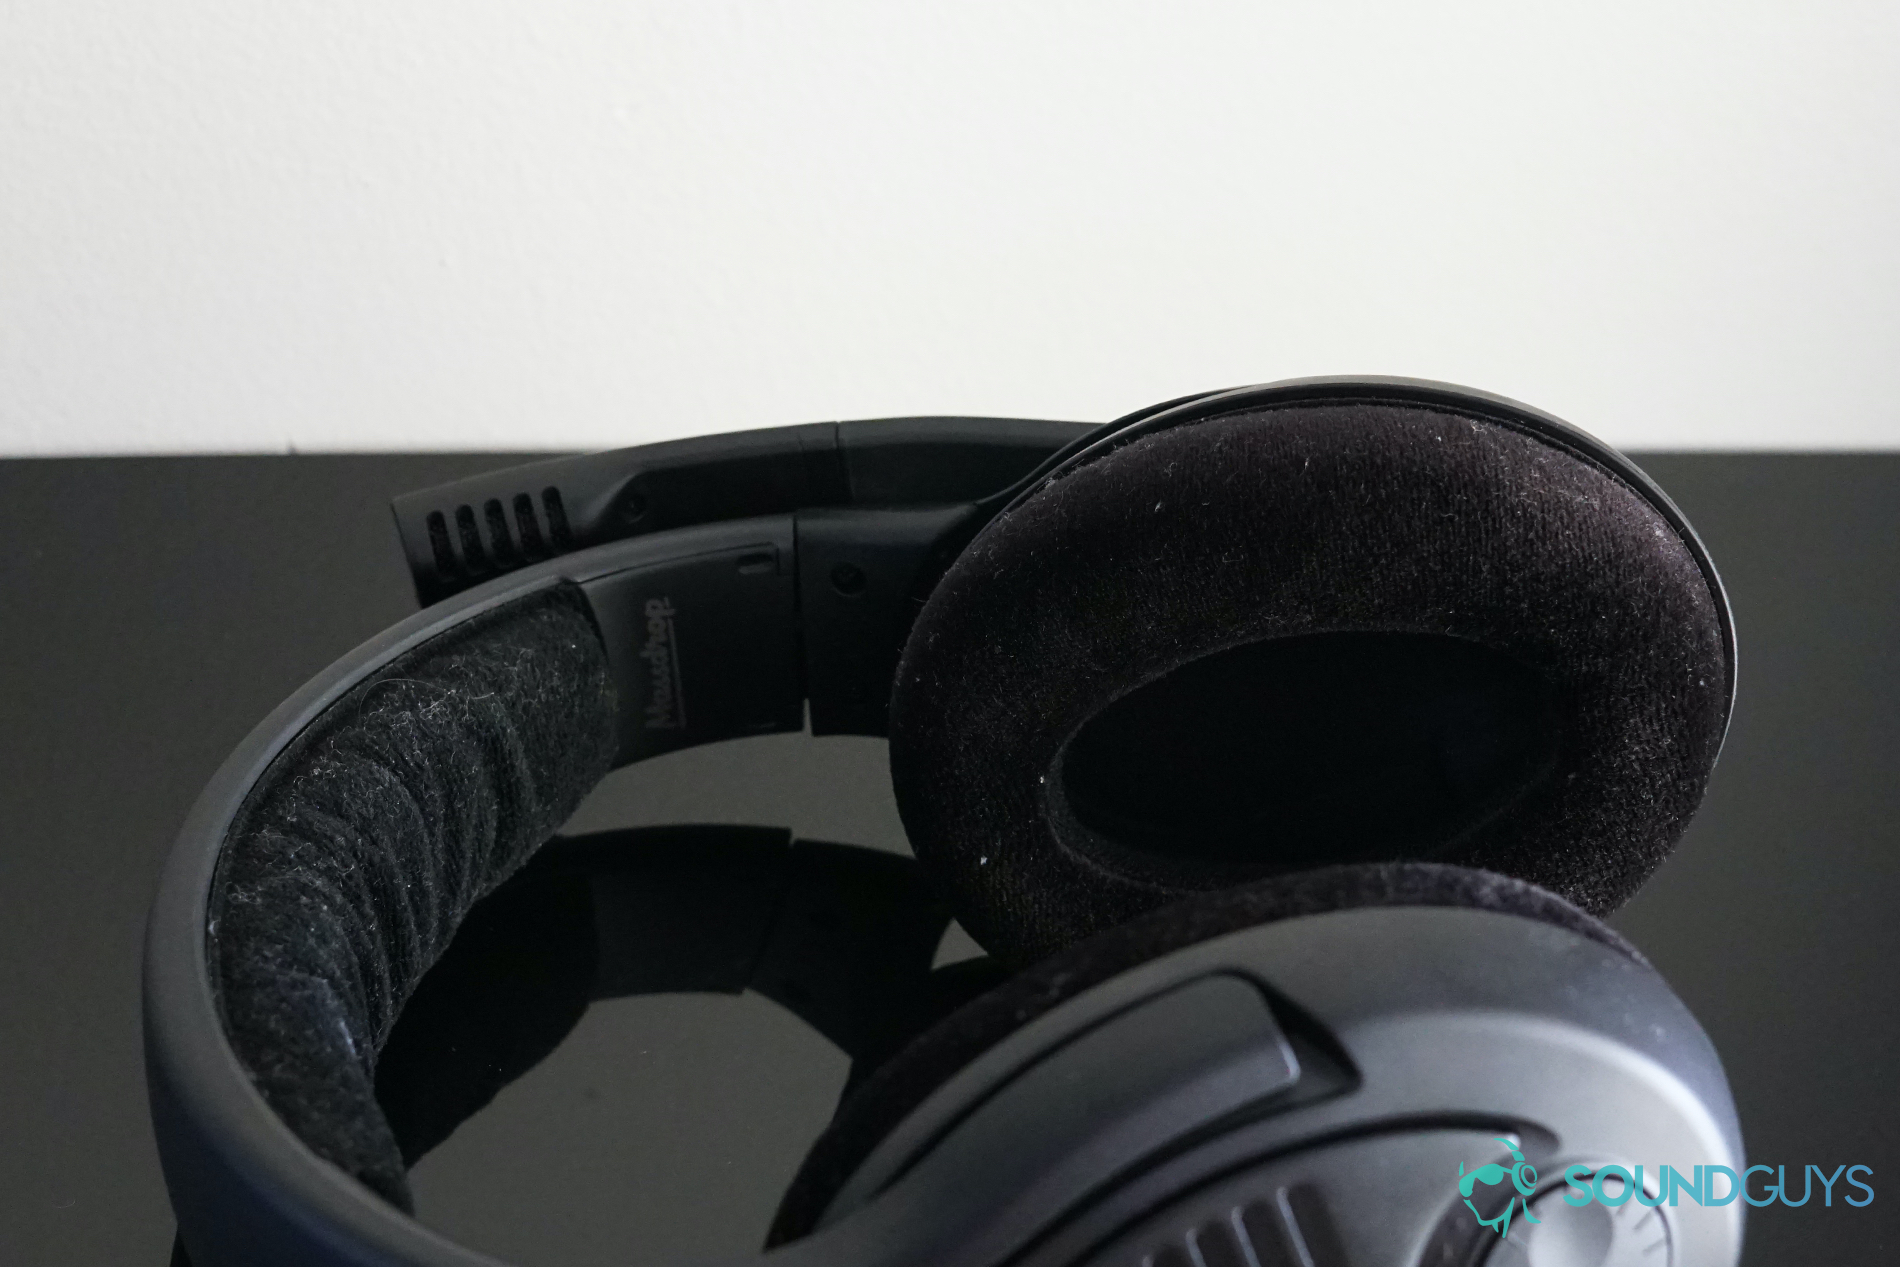 x1337x  Headphone Reviews and Discussion 